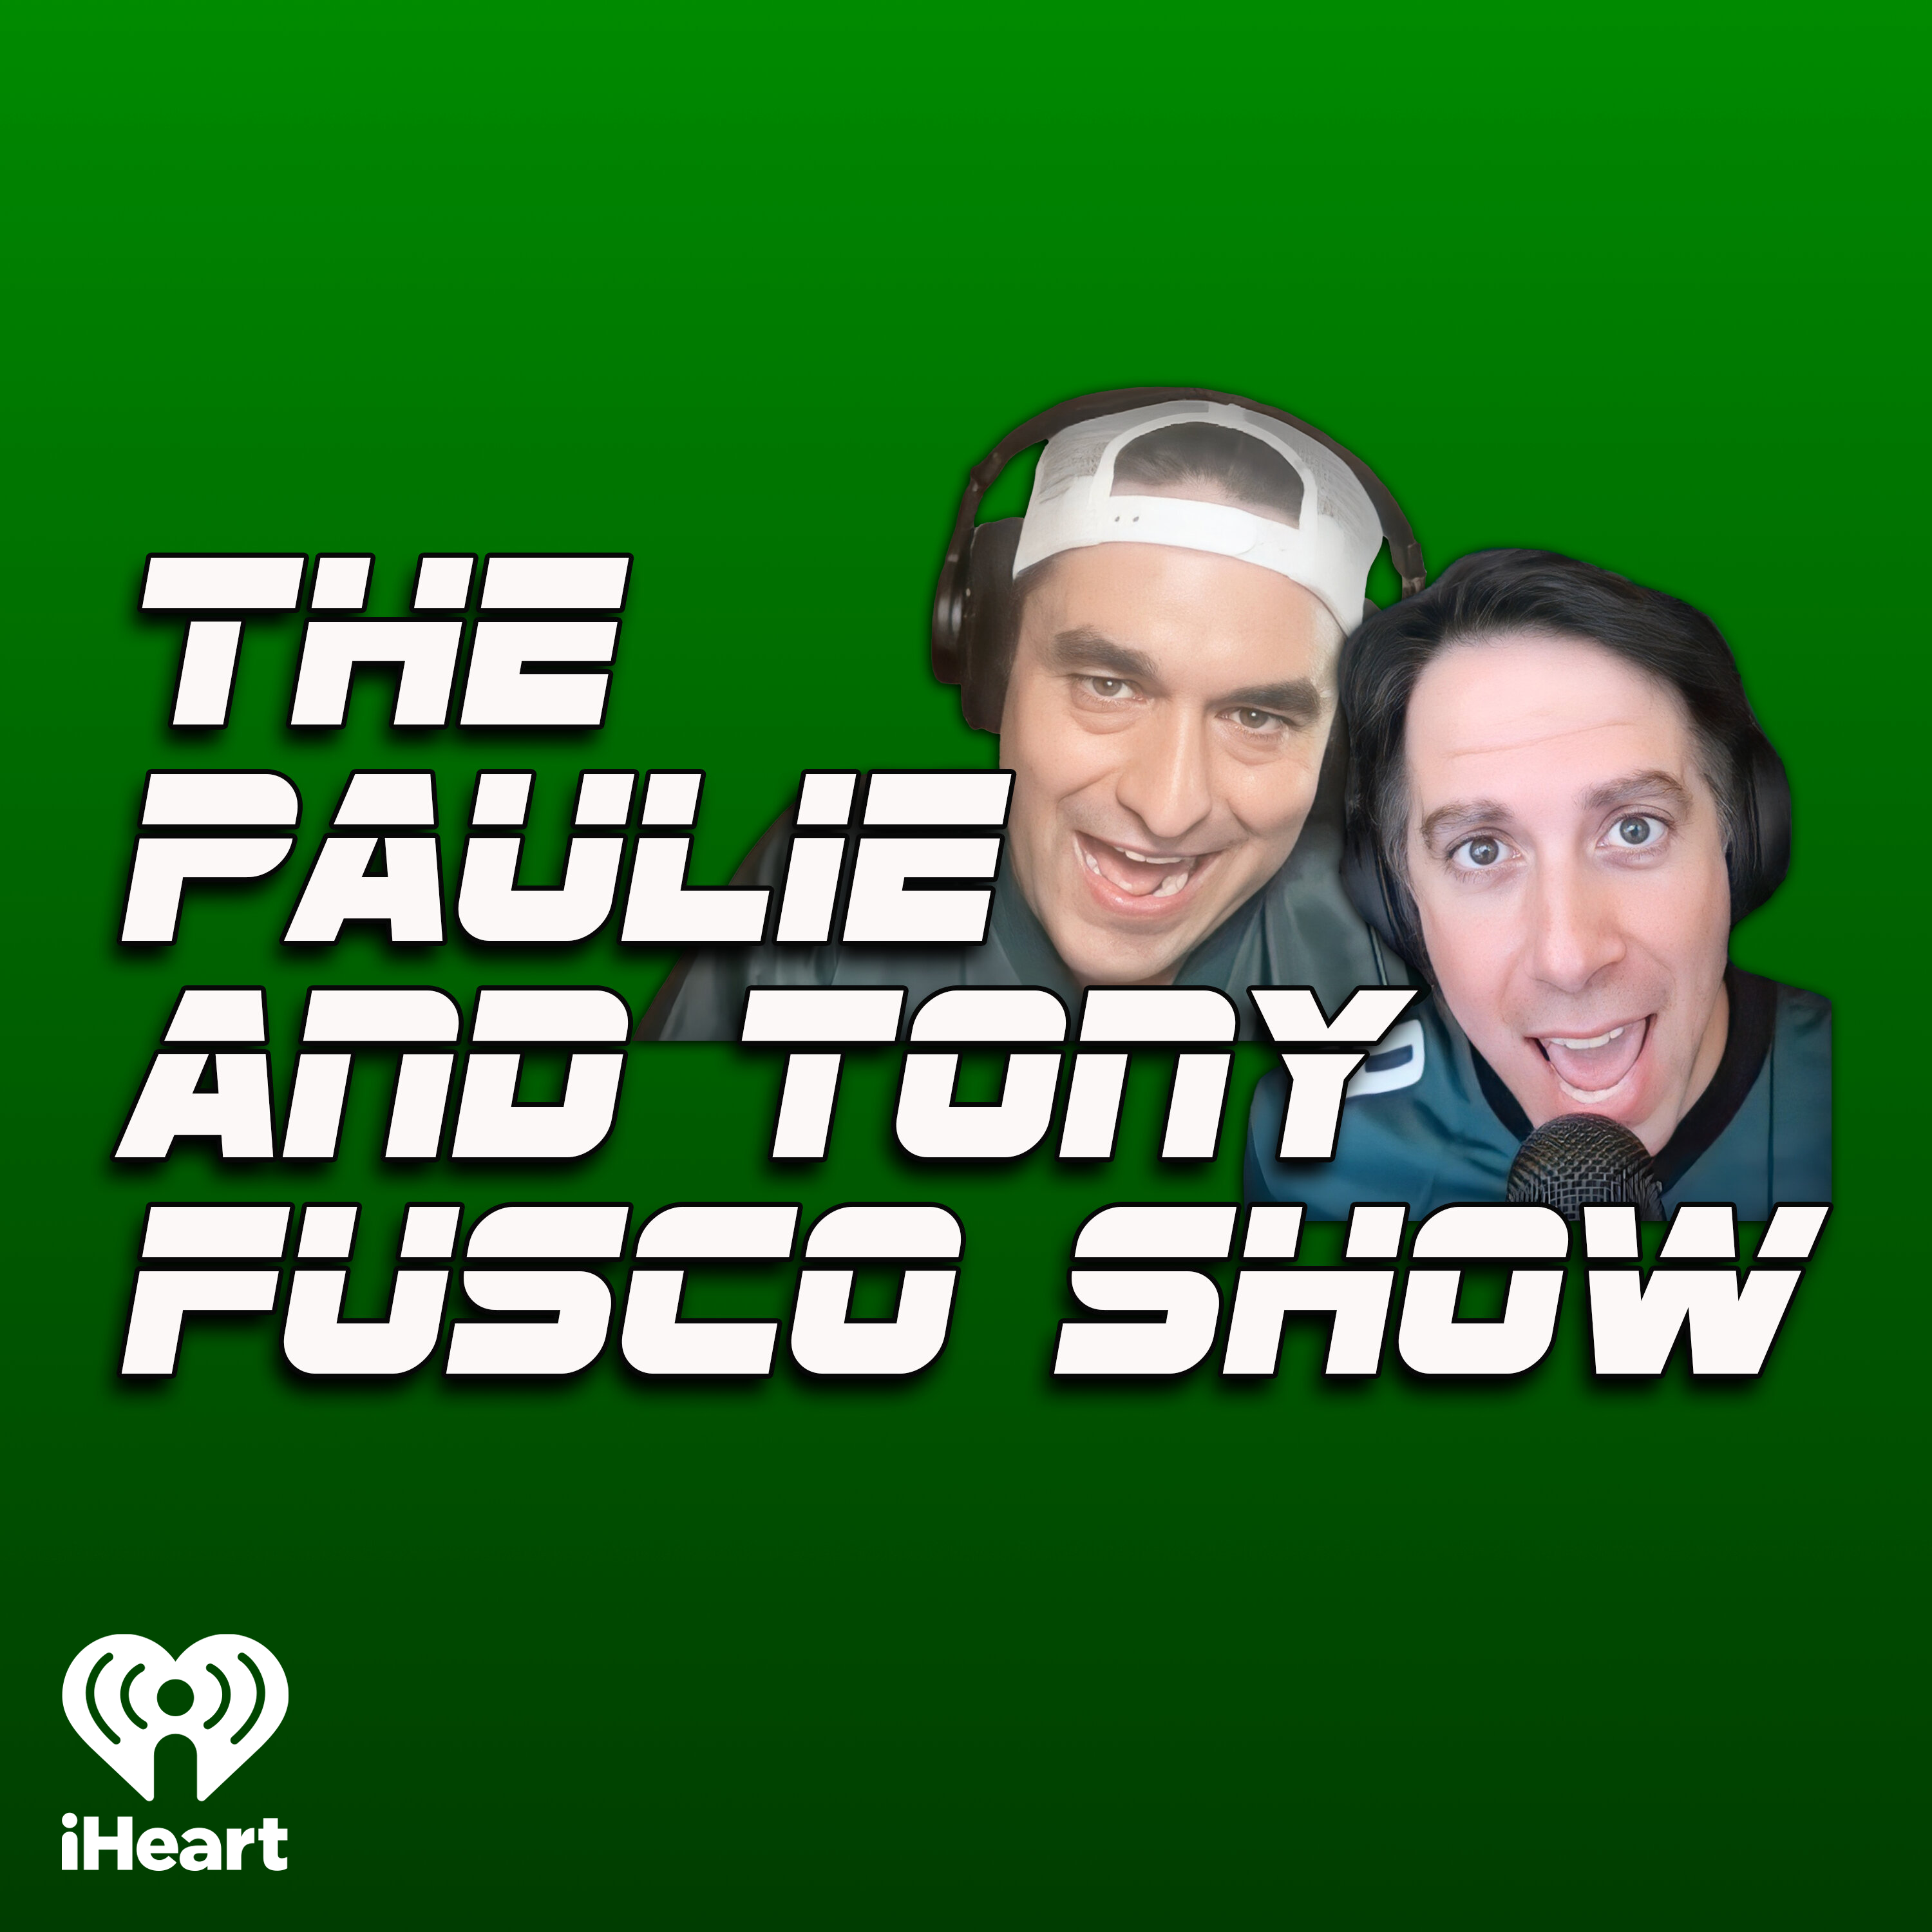 The Paulie & Tony Fusco Show: Geoff Schwartz GETS KICKED OFF THE SHOW + Eagles CLEARLY lost to 49ers on purpose